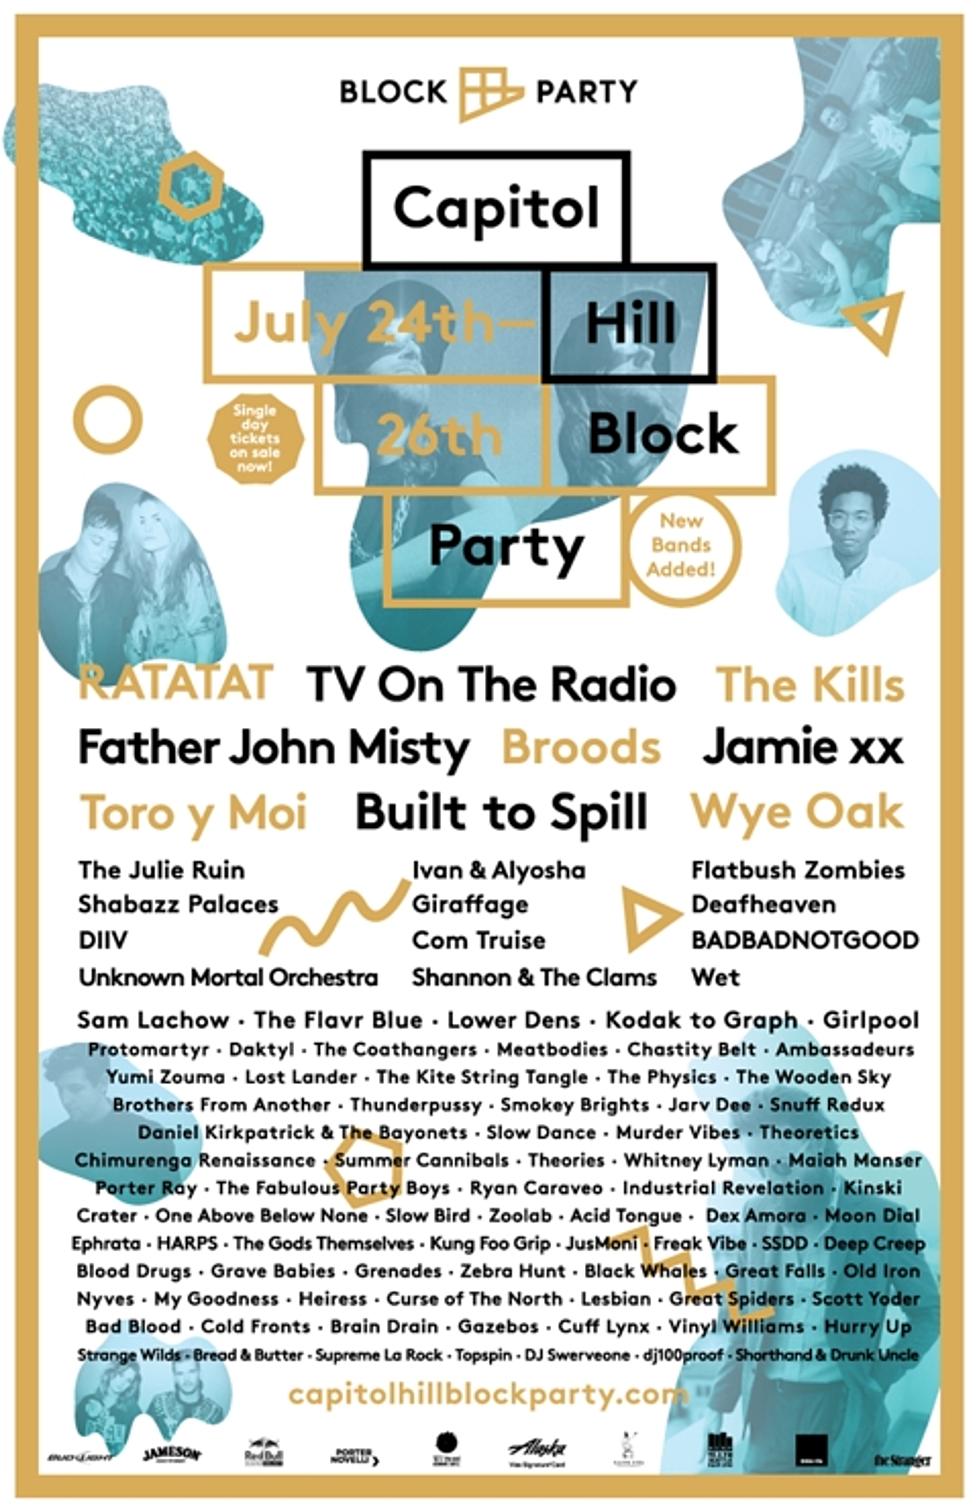 Capitol Hill Block Party includes Ratatat, TVOTR, Father John Misty, SSDD &#038; more ++ get to Seattle early and see So Pitted